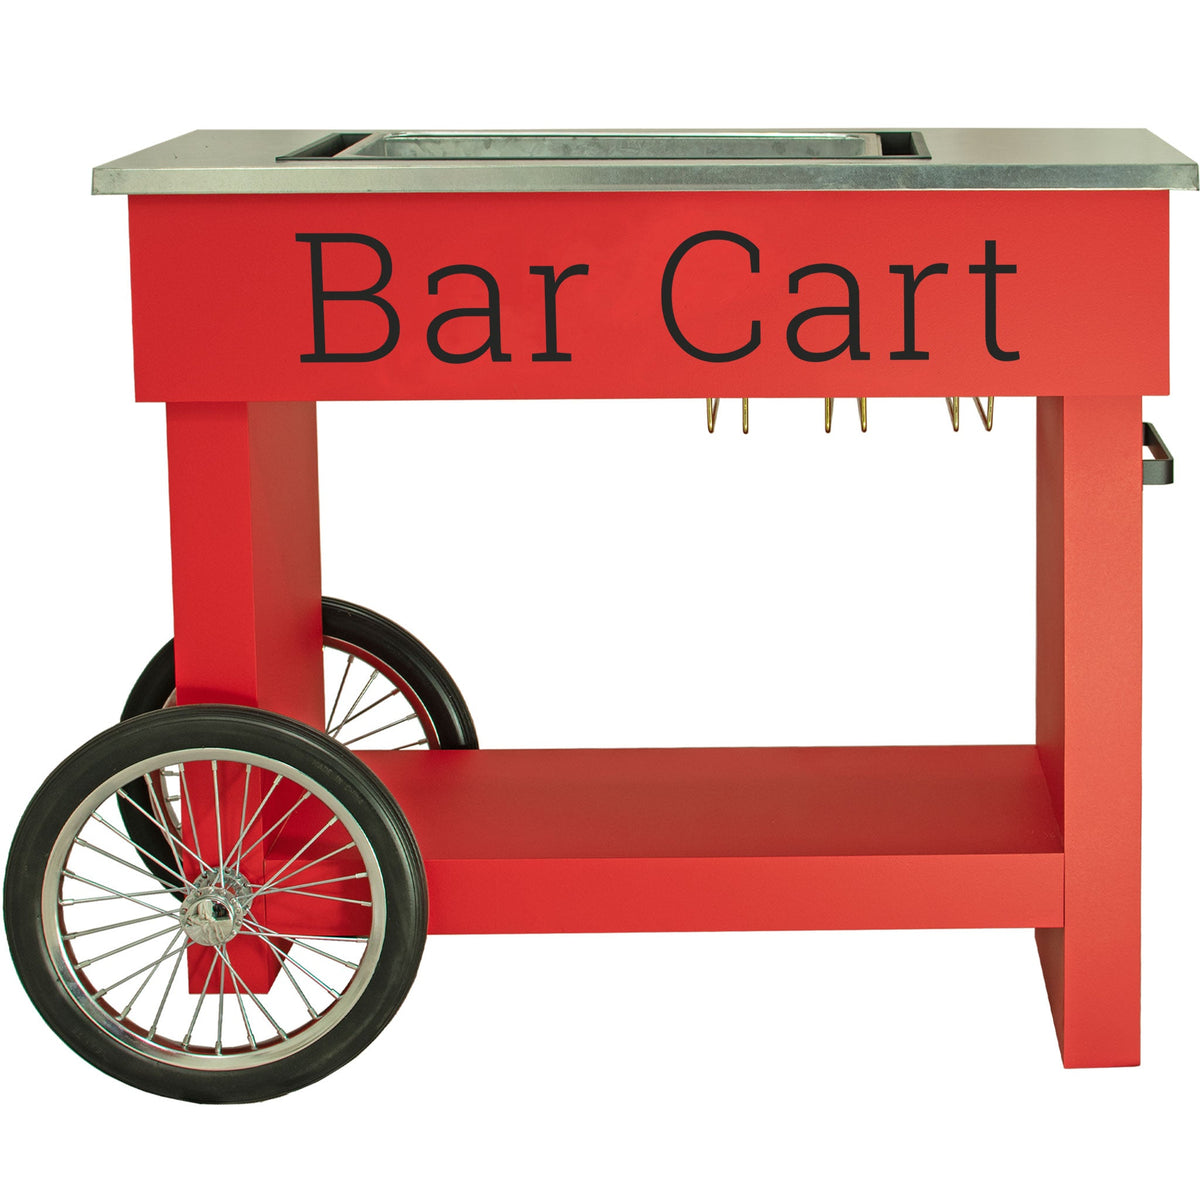 Lee Display's Champagne and Wine Bar Cart with Wheels in Red Color and a Bar Cart Decal